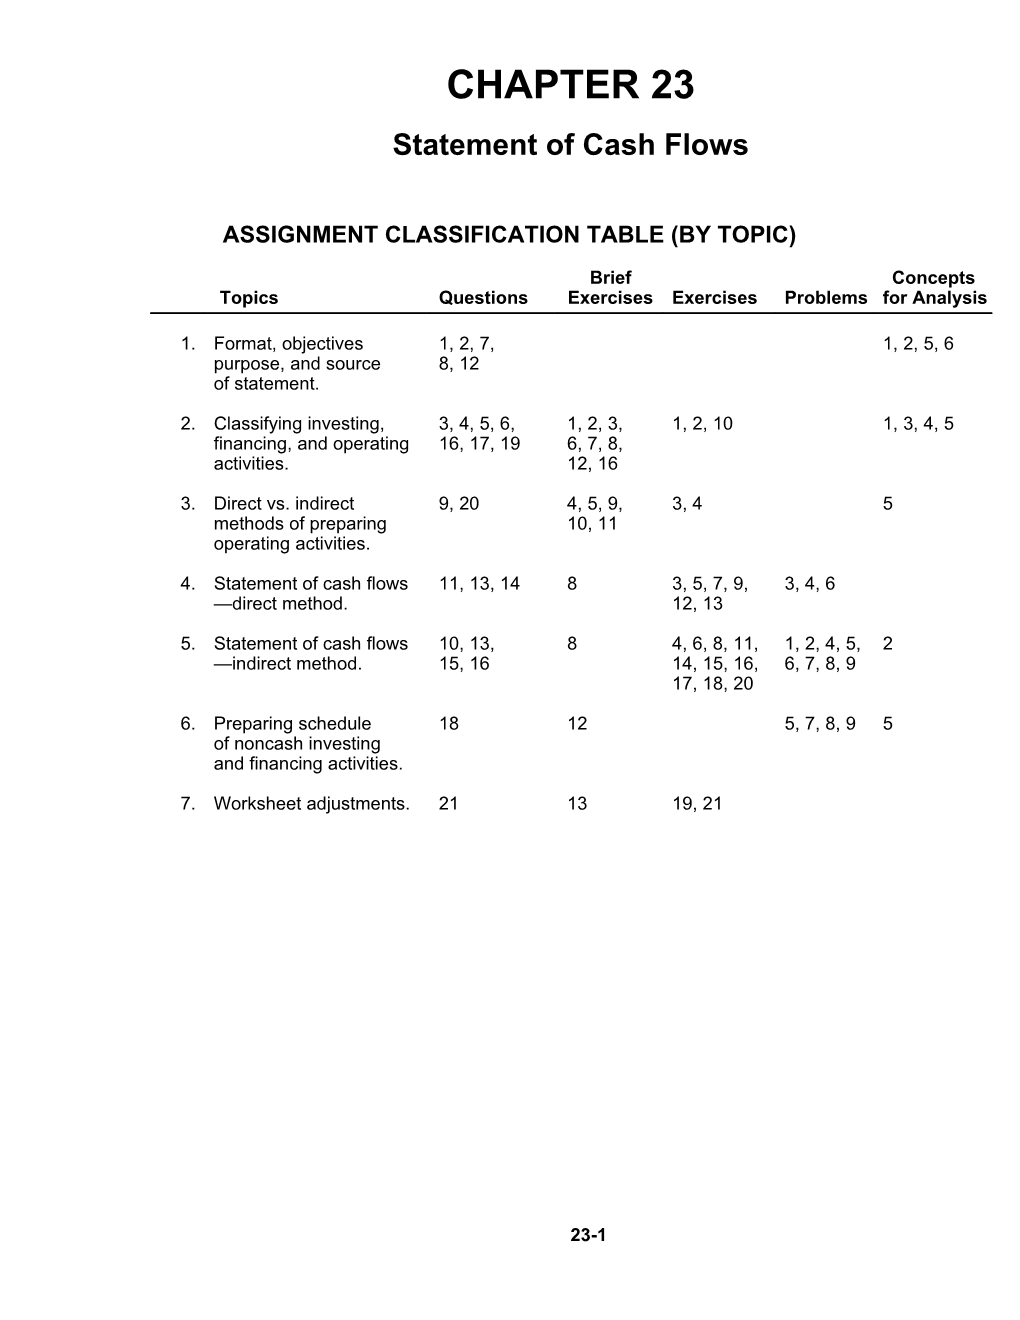 Assignment Classification Table (By Topic)